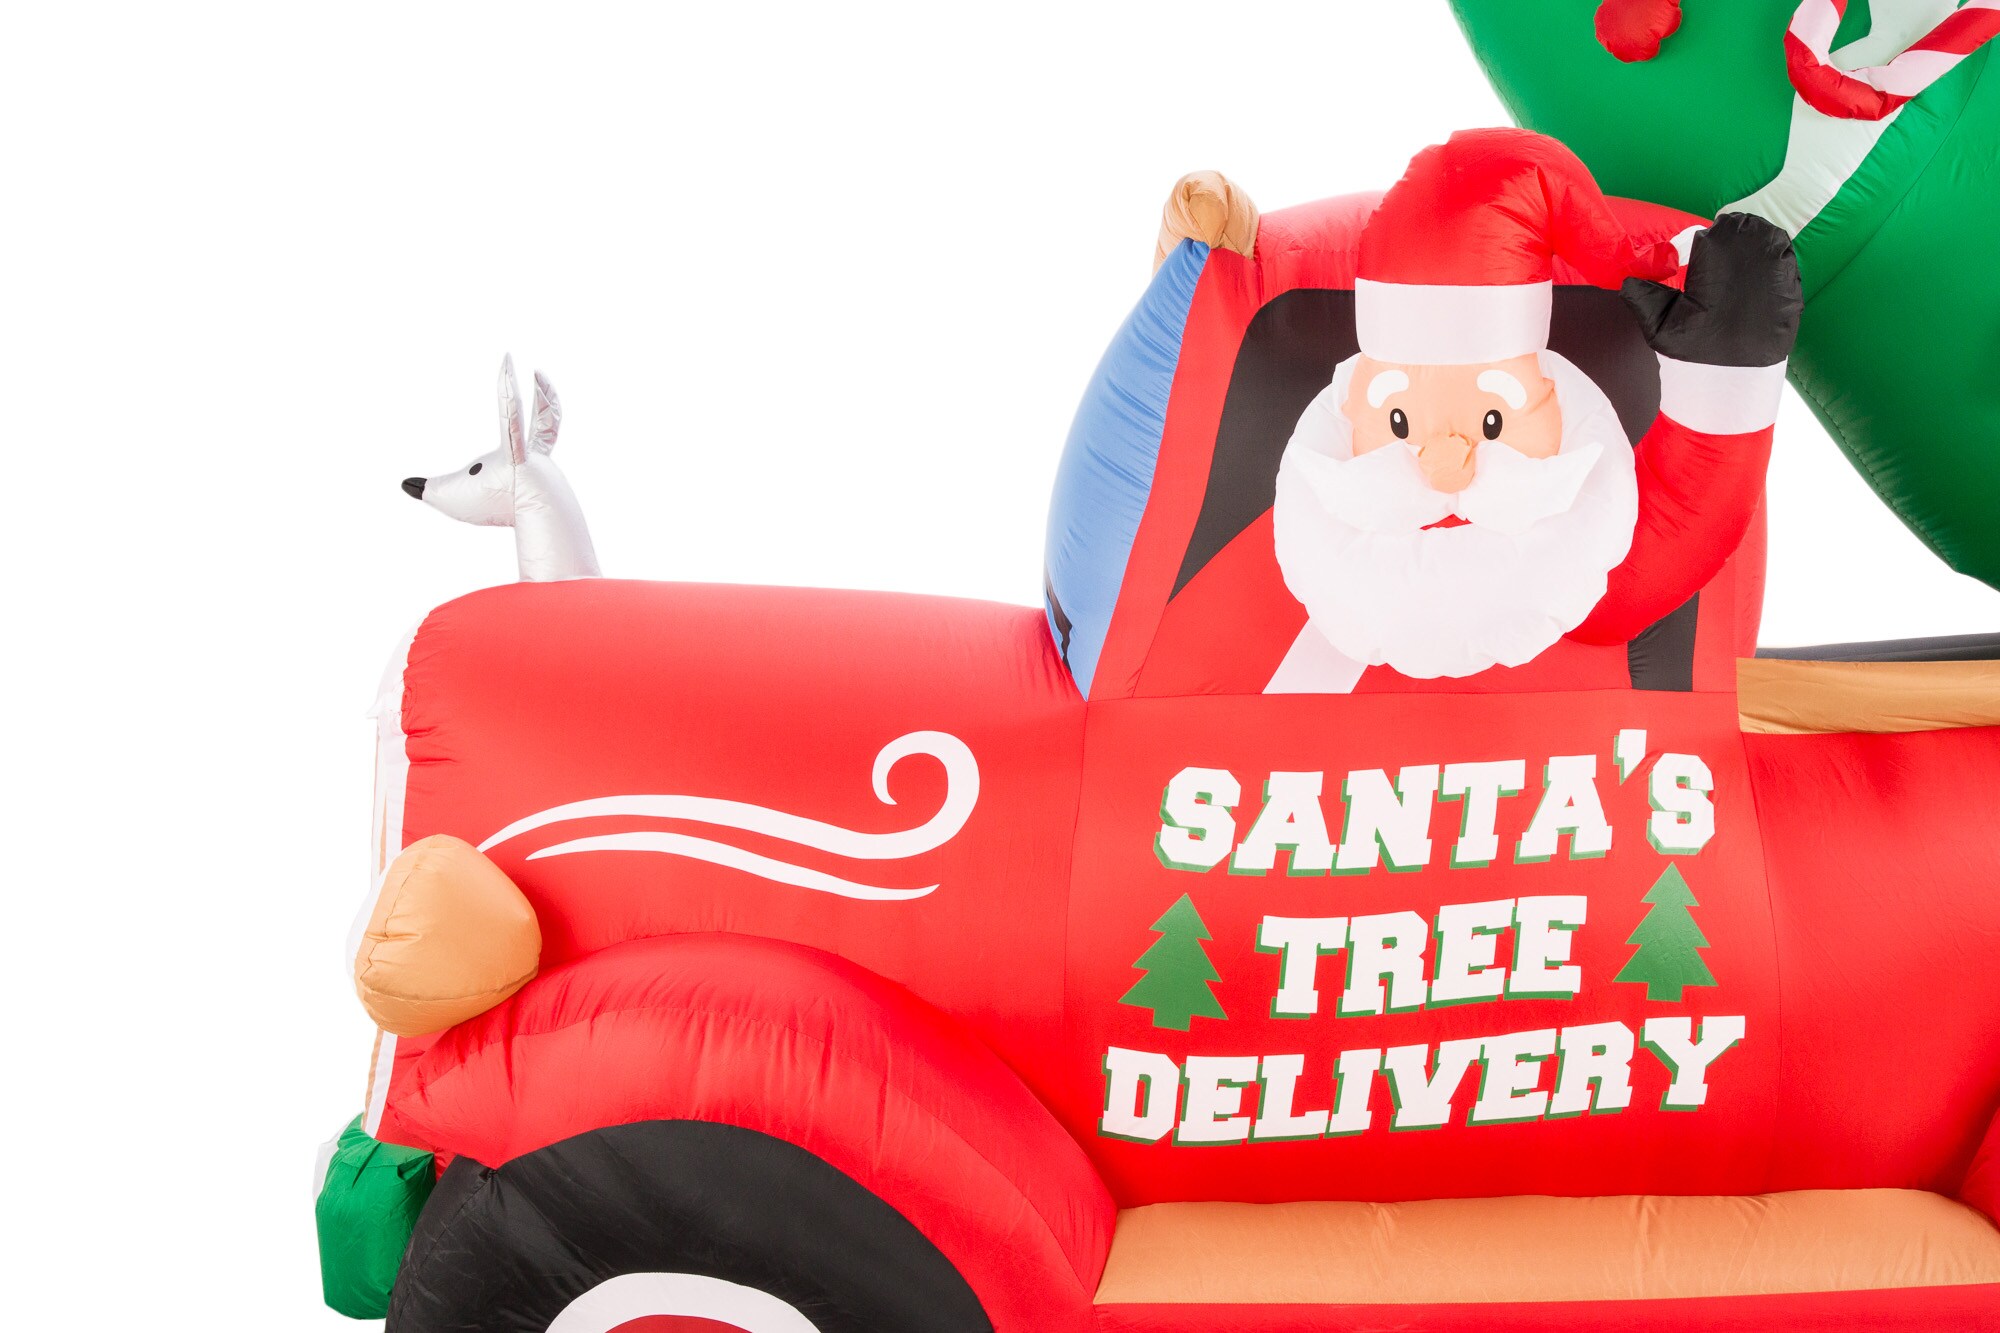 9 Ft SANTA'S TREE DELIVERY RETRO TRUCK Airblown Yard Inflatable 